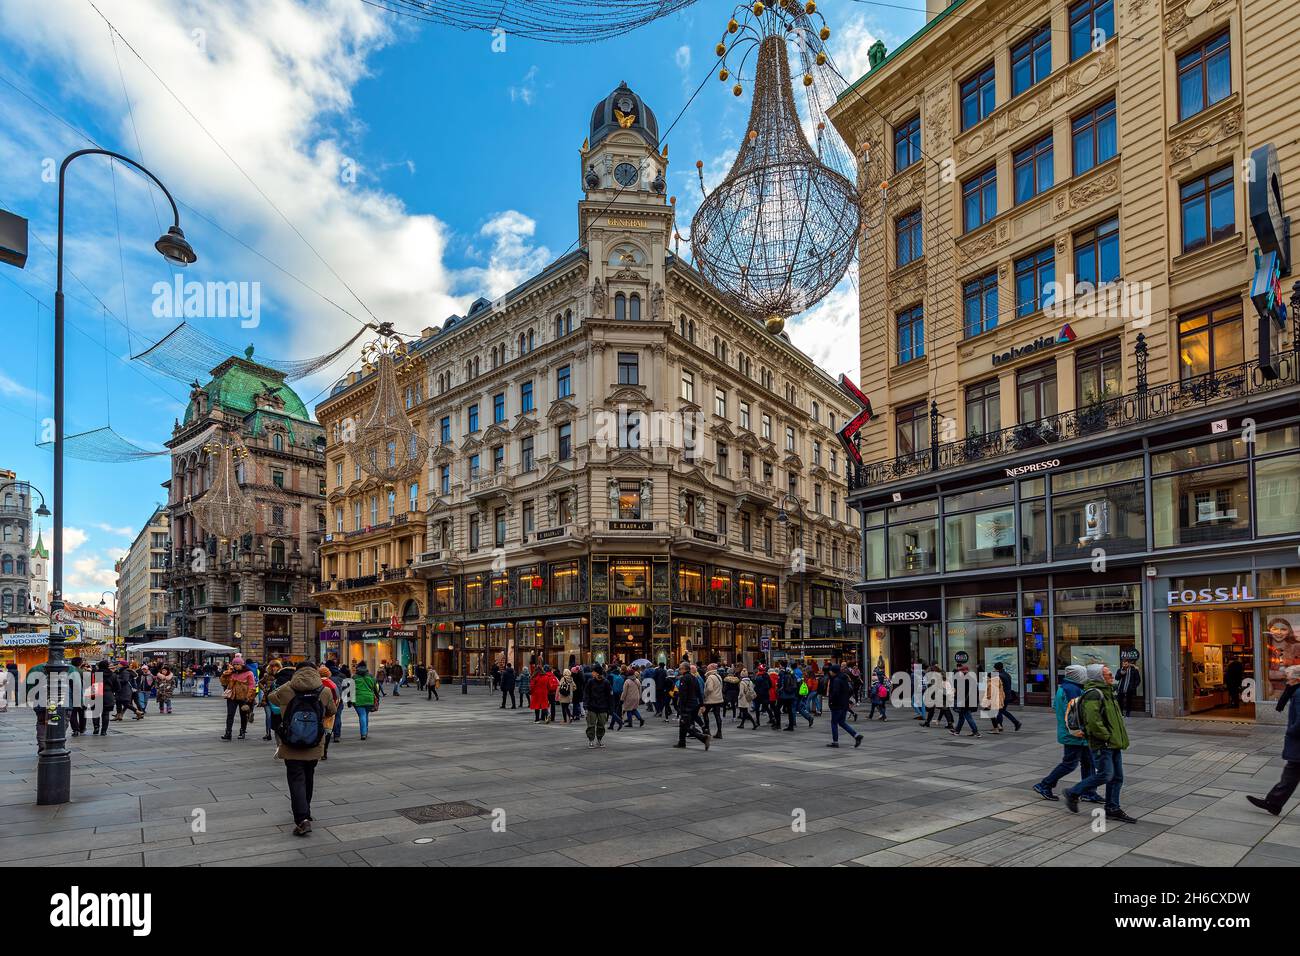 People walking along shops and stores on Graben - one of the most famous promenades and shopping streets in Vienna, Austria. Stock Photo